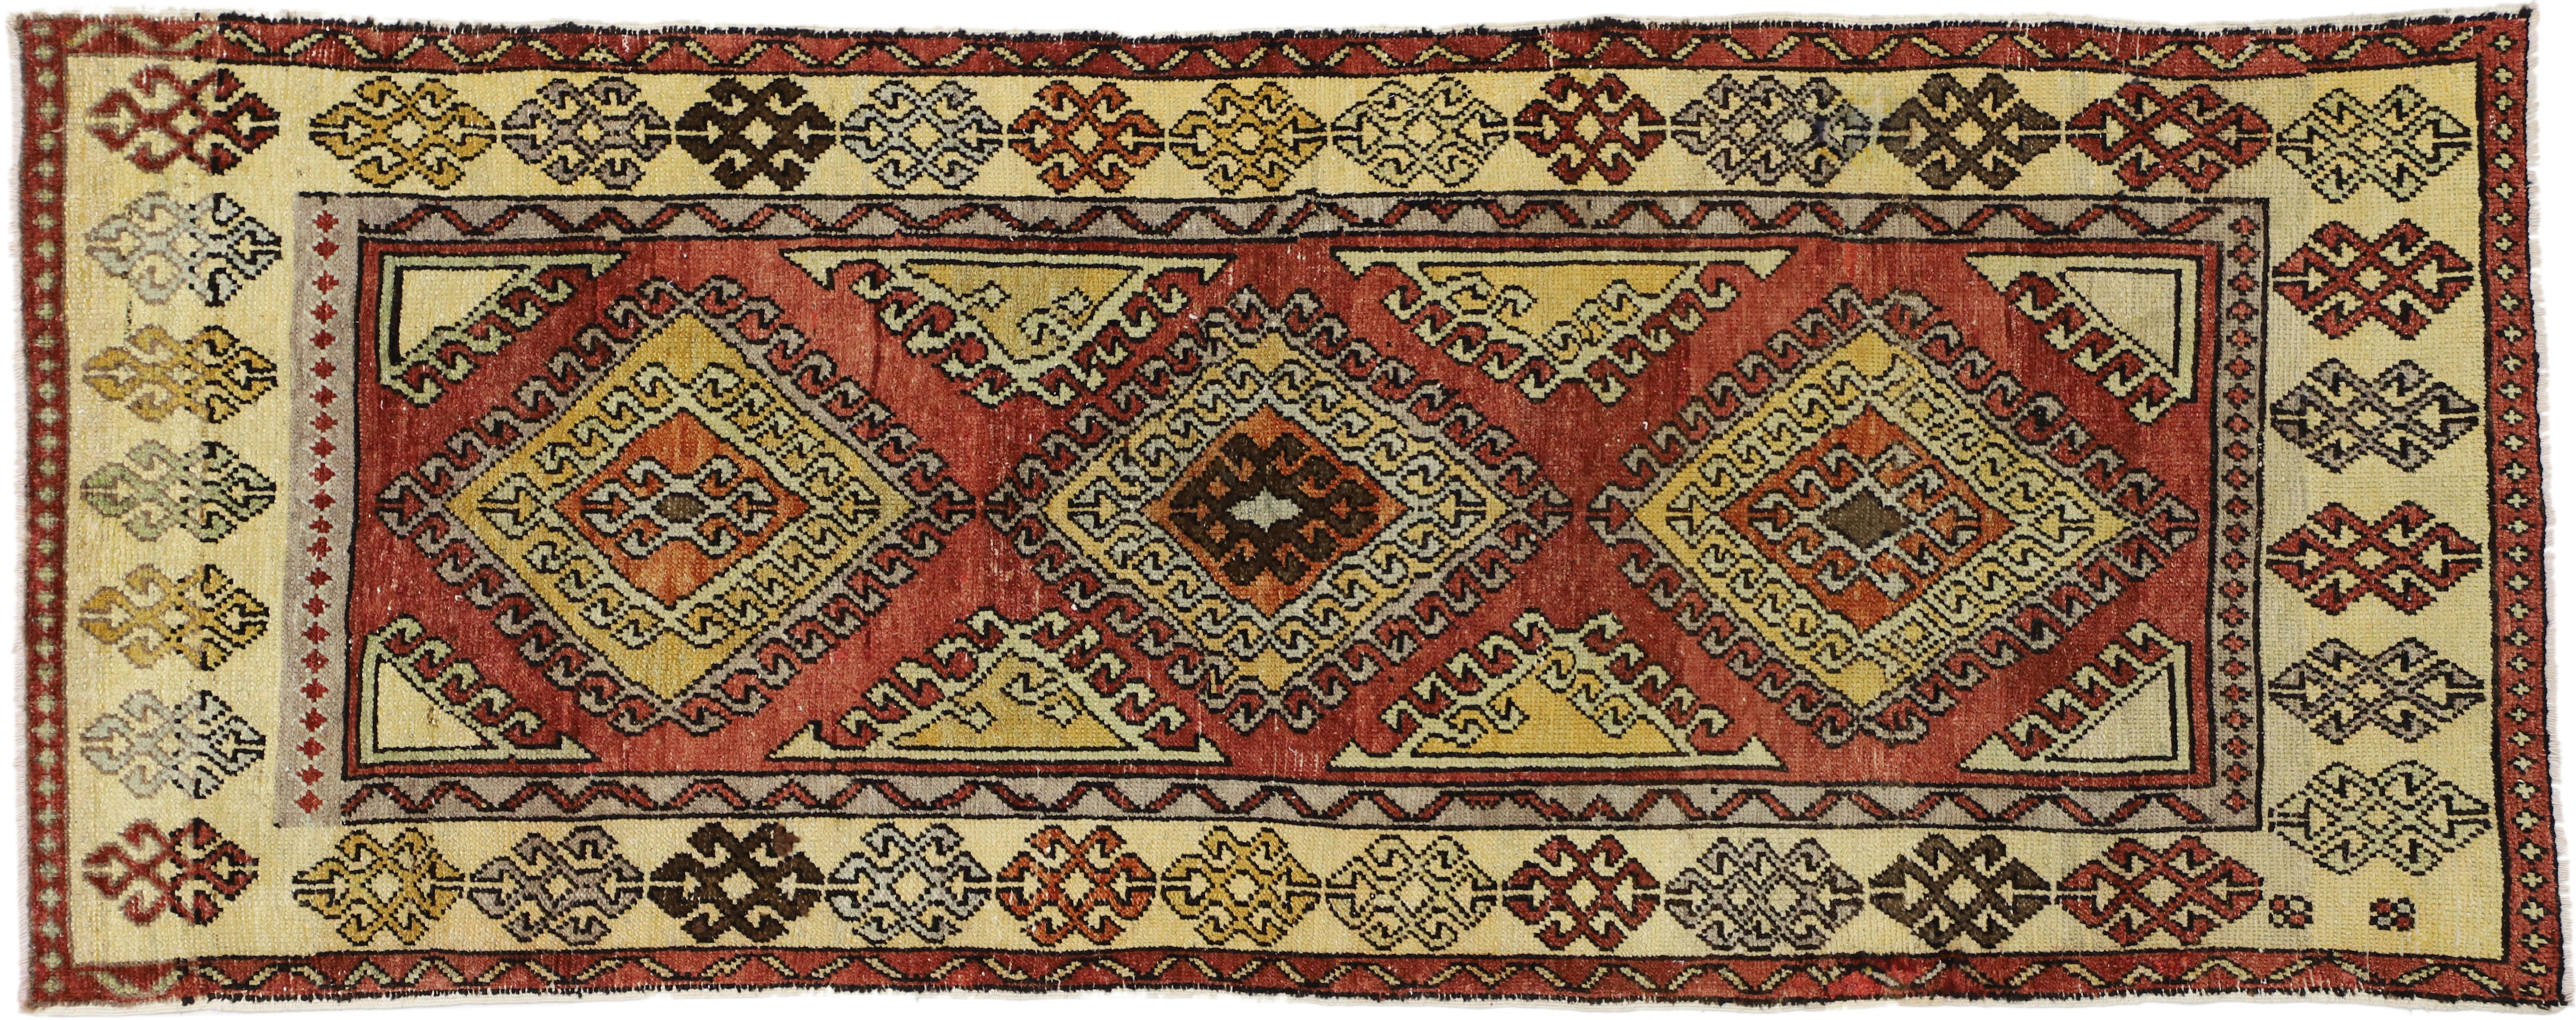 Pair of Vintage Turkish Oushak runners, Matching Tribal Style Hallway runners. This pair of nearly identical hand knotted wool vintage Turkish Oushak runner feature three layered latch-hooked medallions spread across an abrashed brick red field.